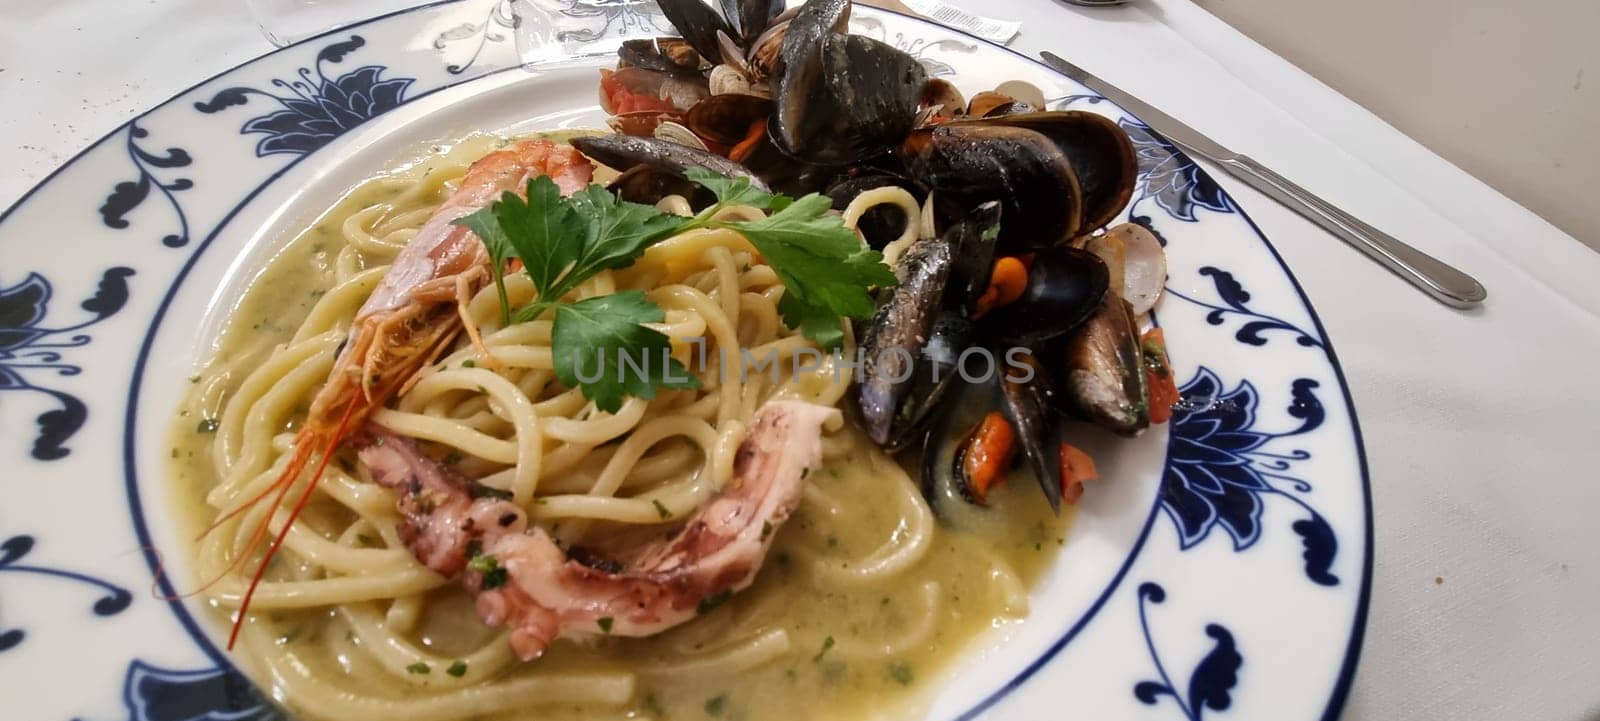 Close-up of a delicious seafood linguine pasta dish with mussels. Shrimp. And squid. Garnished with parsley. Freshly cooked and beautifully presented on a plate